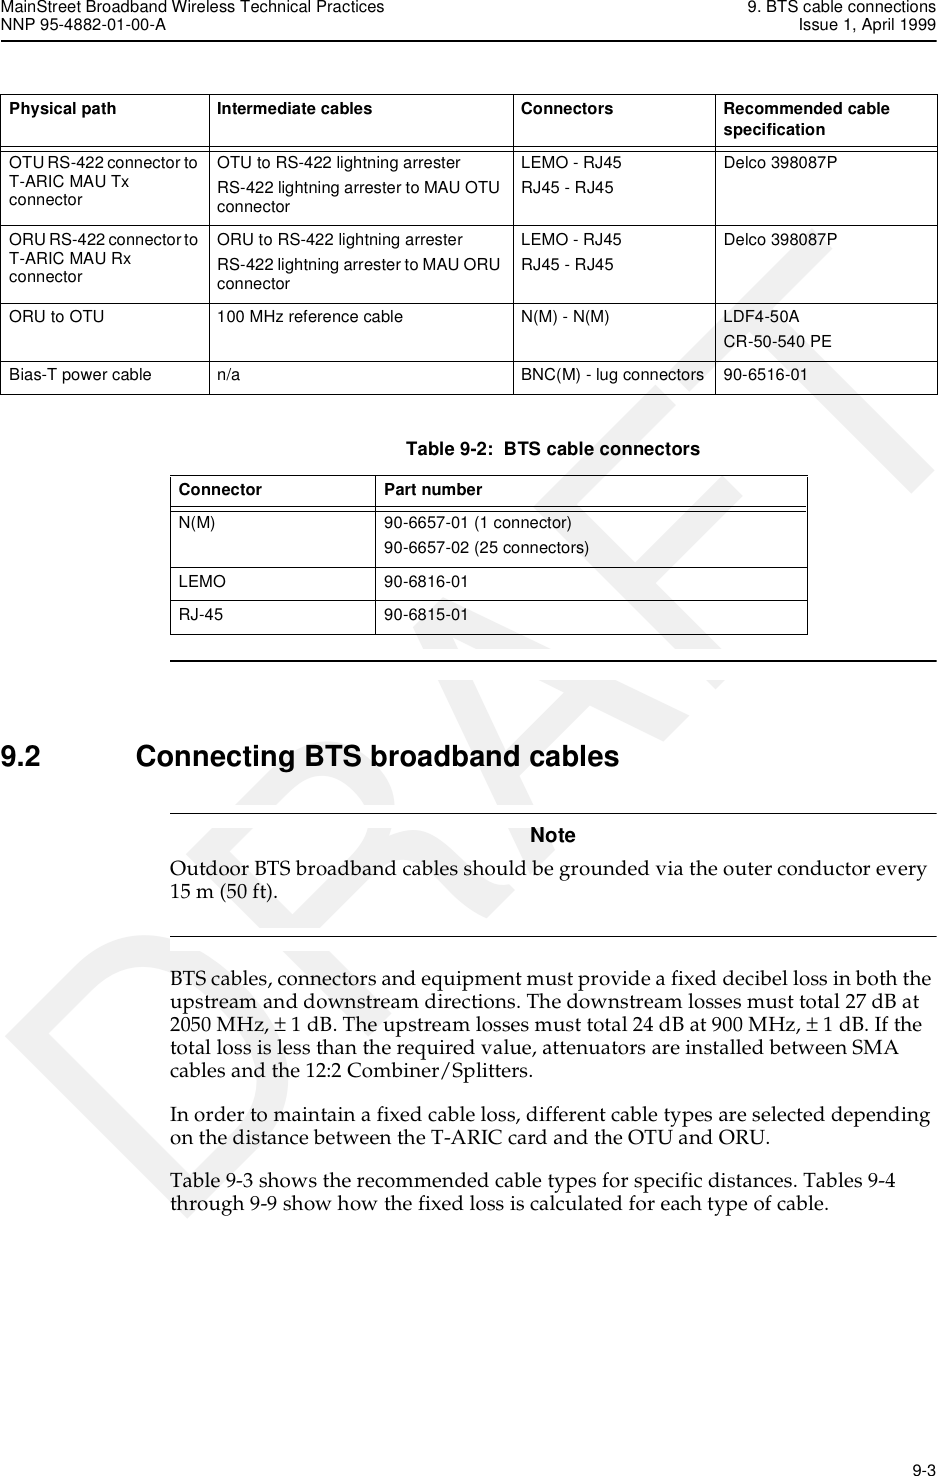 MainStreet Broadband Wireless Technical Practices 9. BTS cable connectionsNNP 95-4882-01-00-A Issue 1, April 1999   9-3DRAFTTable 9-2:  BTS cable connectors9.2 Connecting BTS broadband cablesNoteOutdoor BTS broadband cables should be grounded via the outer conductor every 15 m (50 ft). BTS cables, connectors and equipment must provide a fixed decibel loss in both the upstream and downstream directions. The downstream losses must total 27 dB at 2050 MHz, ± 1 dB. The upstream losses must total 24 dB at 900 MHz, ± 1 dB. If the total loss is less than the required value, attenuators are installed between SMA cables and the 12:2 Combiner/Splitters.In order to maintain a fixed cable loss, different cable types are selected depending on the distance between the T-ARIC card and the OTU and ORU.Table 9-3 shows the recommended cable types for specific distances. Tables 9-4 through 9-9 show how the fixed loss is calculated for each type of cable.OTU RS-422 connector to T-ARIC MAU Tx connectorOTU to RS-422 lightning arresterRS-422 lightning arrester to MAU OTU connectorLEMO - RJ45 RJ45 - RJ45 Delco 398087PORU RS-422 connector to T-ARIC MAU Rx connectorORU to RS-422 lightning arresterRS-422 lightning arrester to MAU ORU connectorLEMO - RJ45 RJ45 - RJ45 Delco 398087PORU to OTU 100 MHz reference cable N(M) - N(M) LDF4-50ACR-50-540 PEBias-T power cable n/a BNC(M) - lug connectors 90-6516-01Physical path Intermediate cables Connectors Recommended cable specificationConnector Part numberN(M)  90-6657-01 (1 connector)90-6657-02 (25 connectors)LEMO 90-6816-01RJ-45 90-6815-01